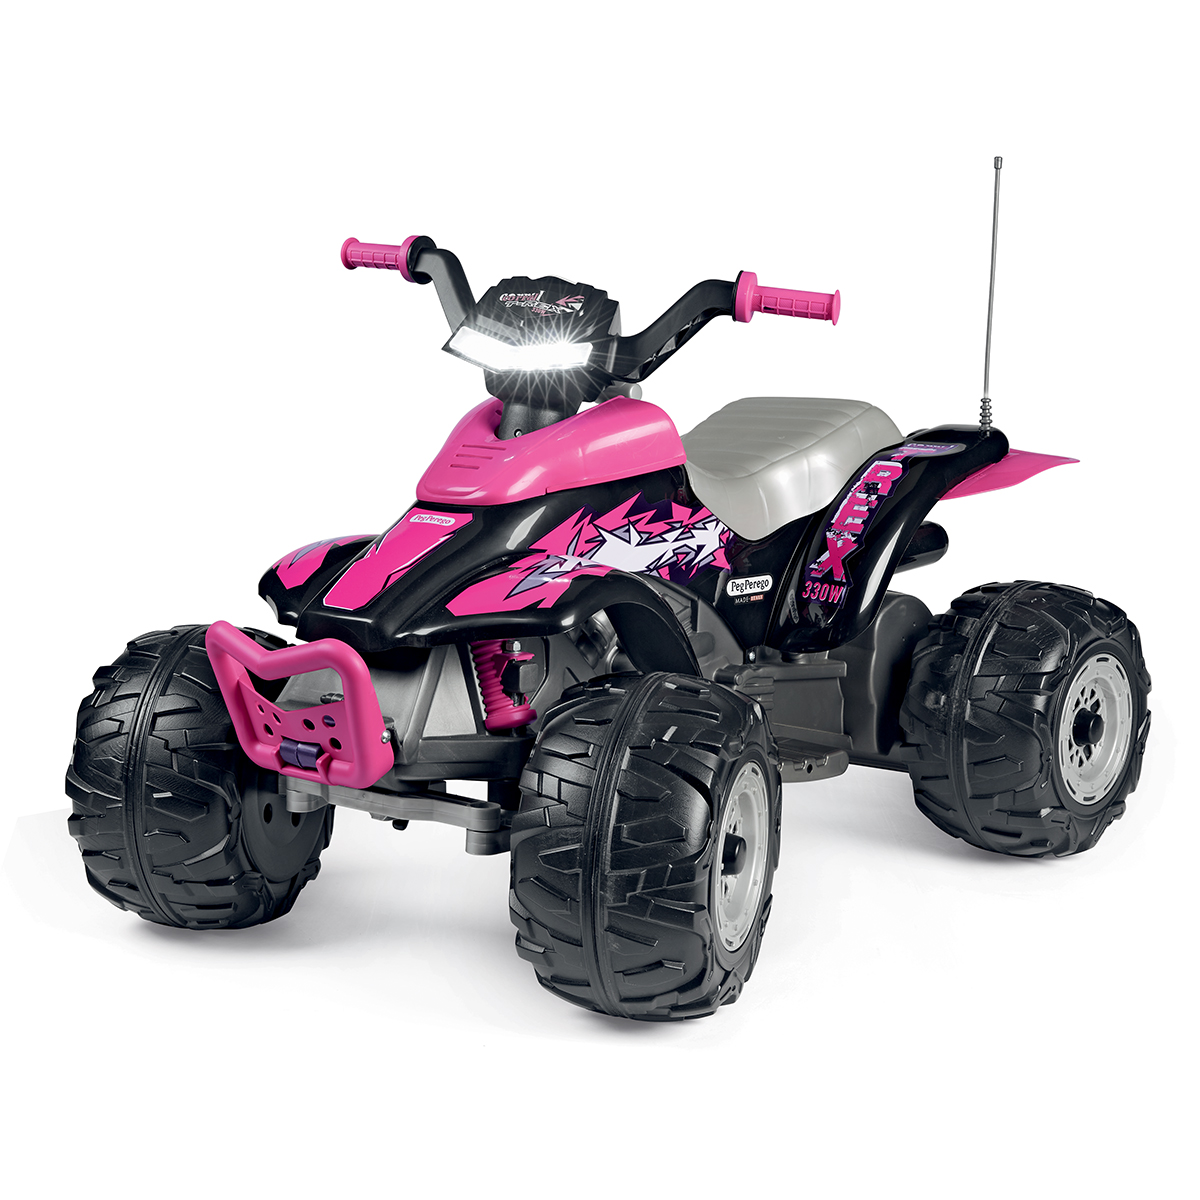 OR0101_Corral T-Rex 330W Pink_3-4 front-lht